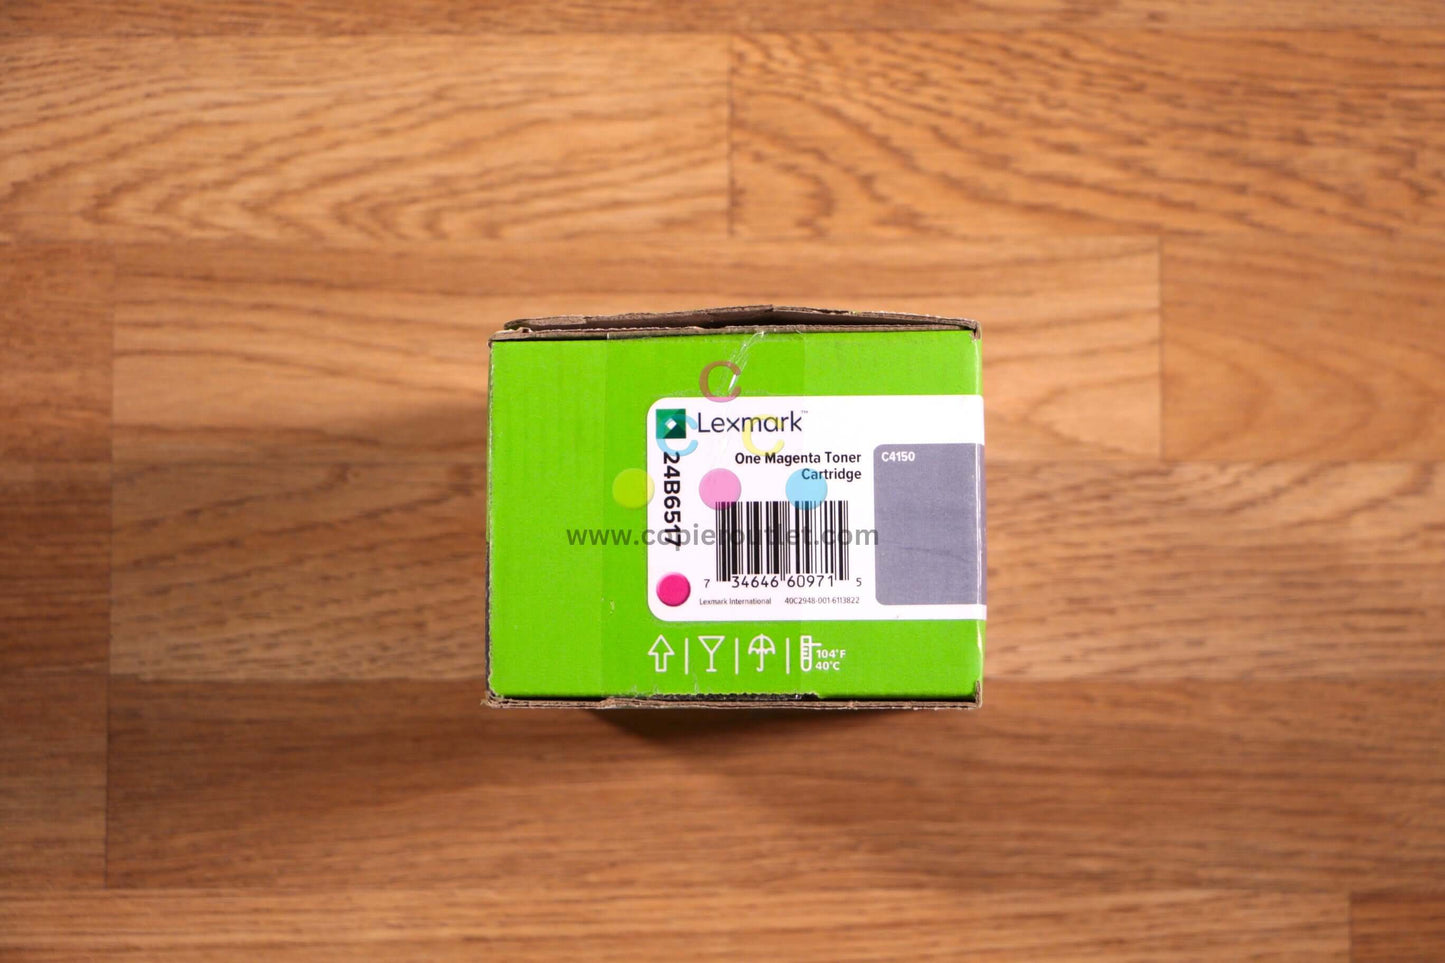 Lexmark Magenta 24B6517 Toner Cartridge For C4150 Box Has Cosmetic Imperfections - copier-clearance-center